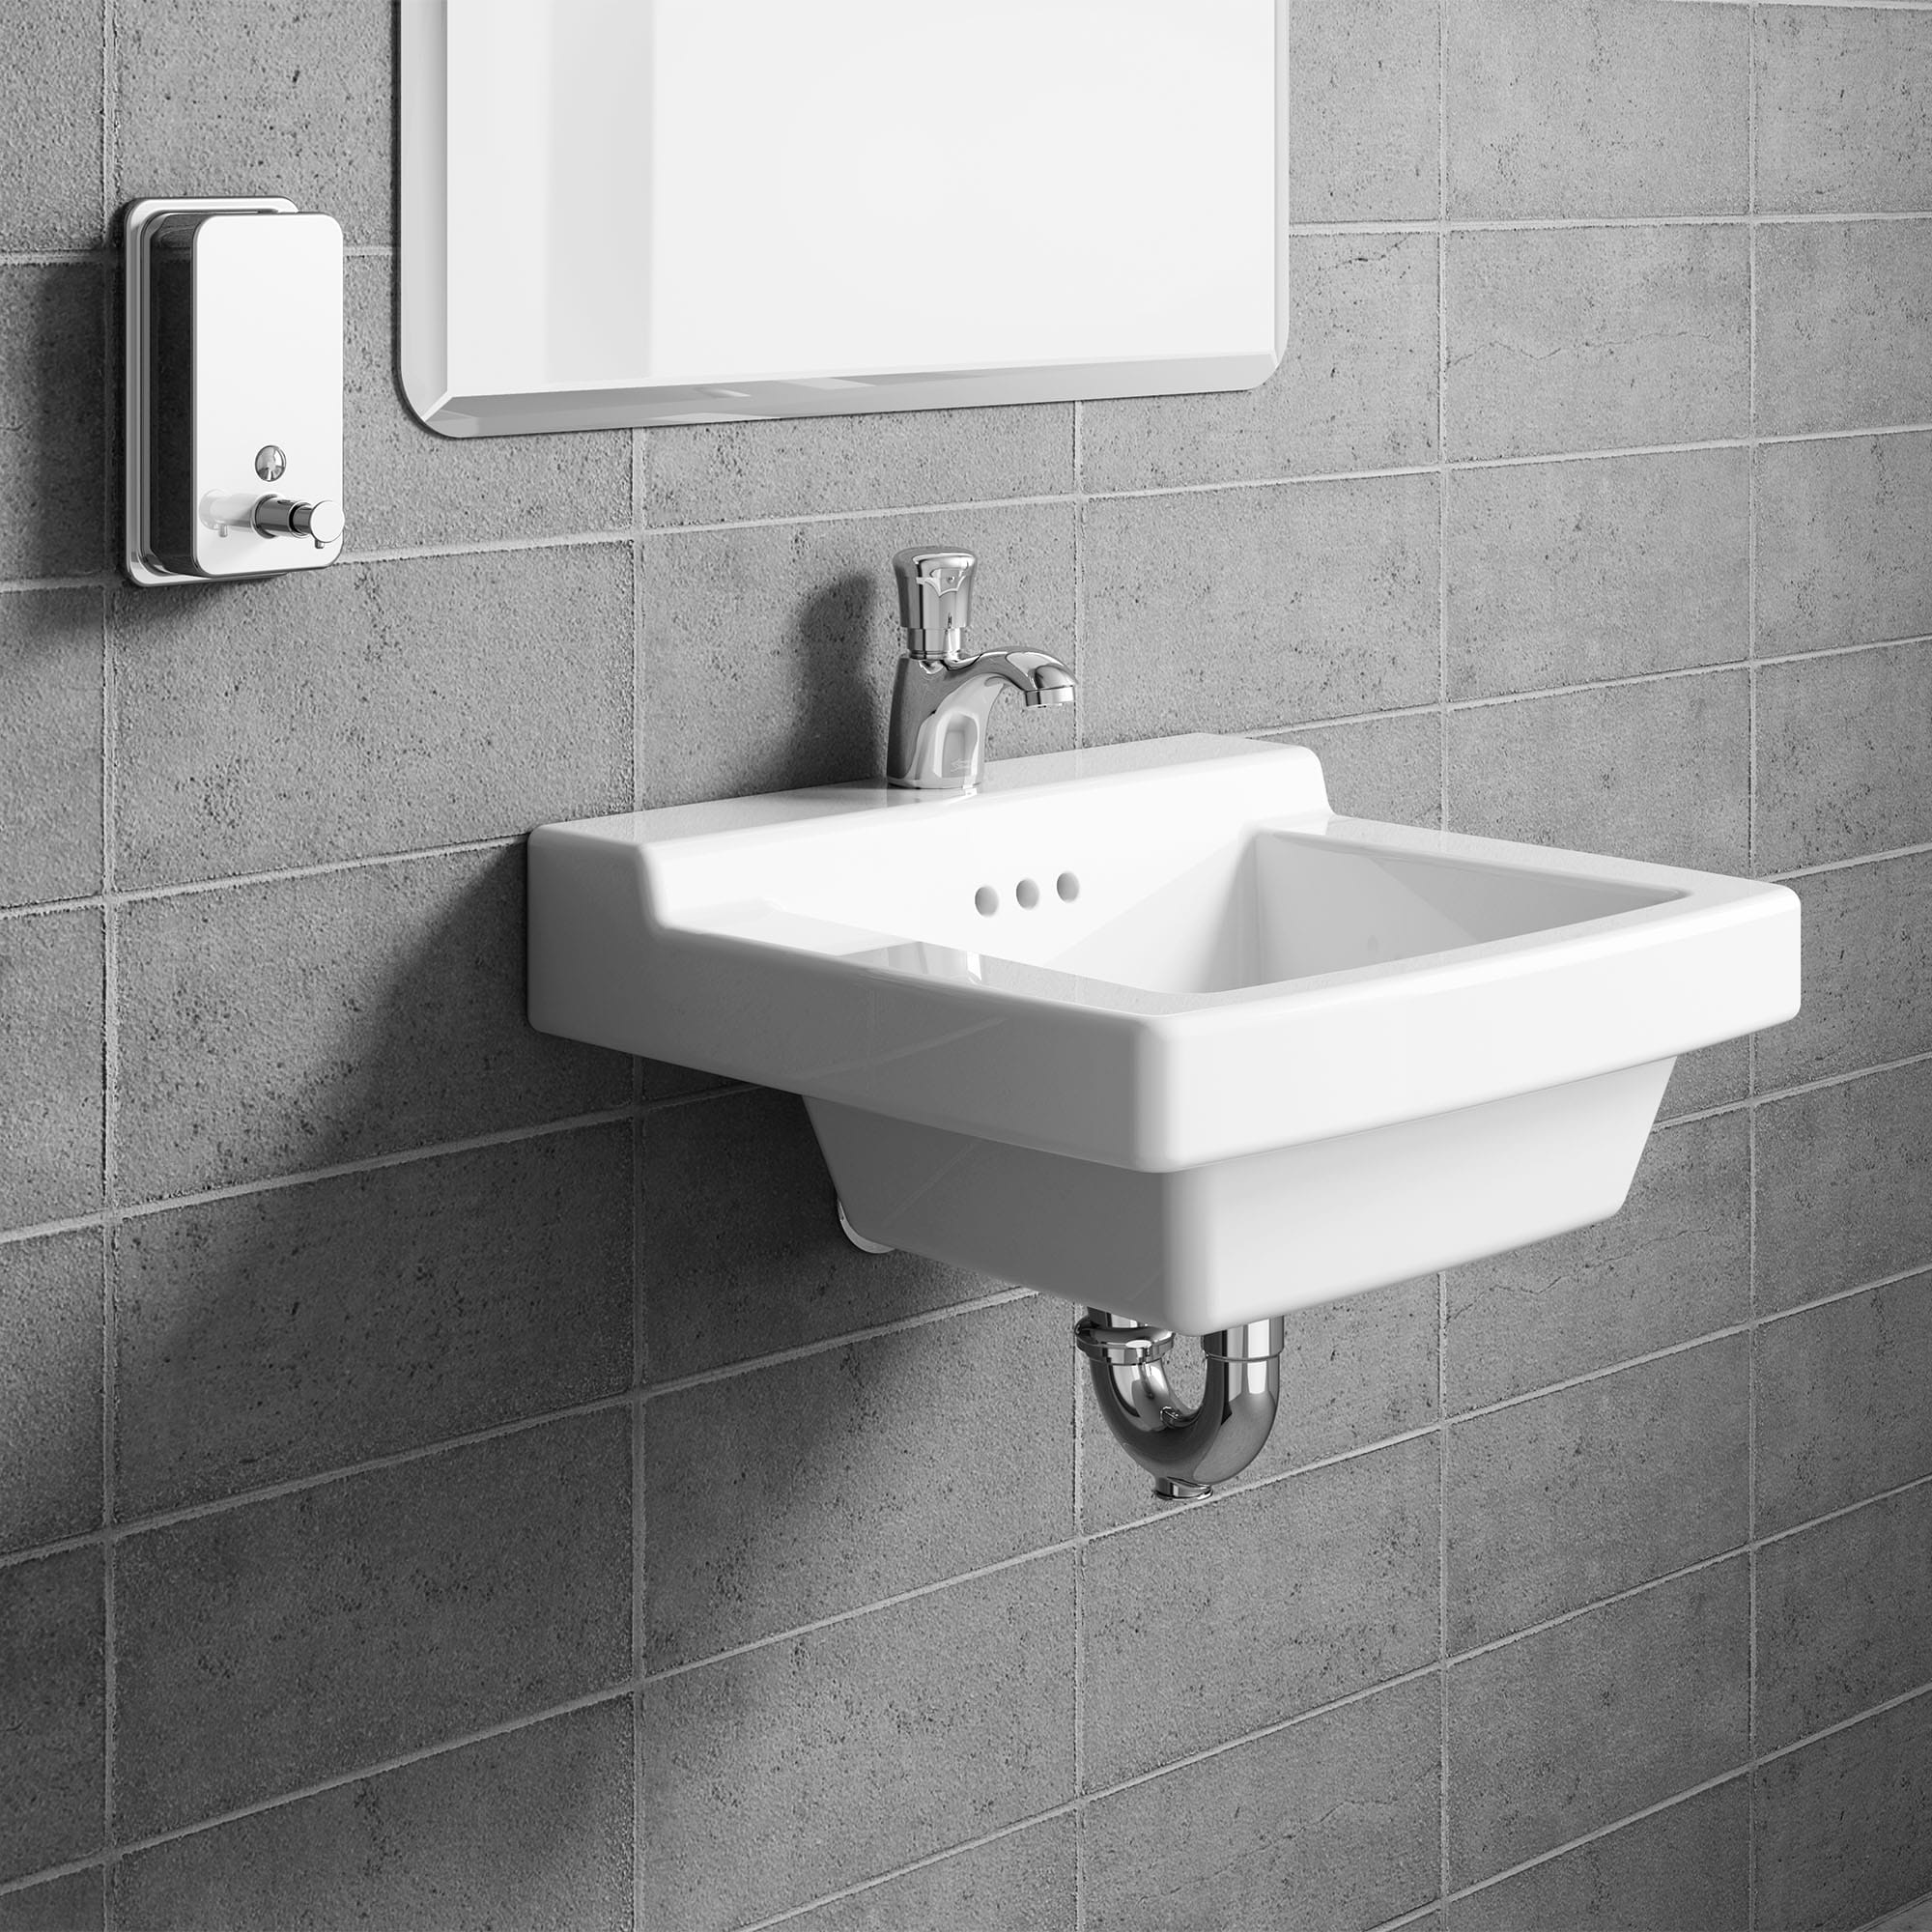 American Standard 1340119.002 Pillar Tap Metering Faucet with Extended Spout 0.5 GPM 